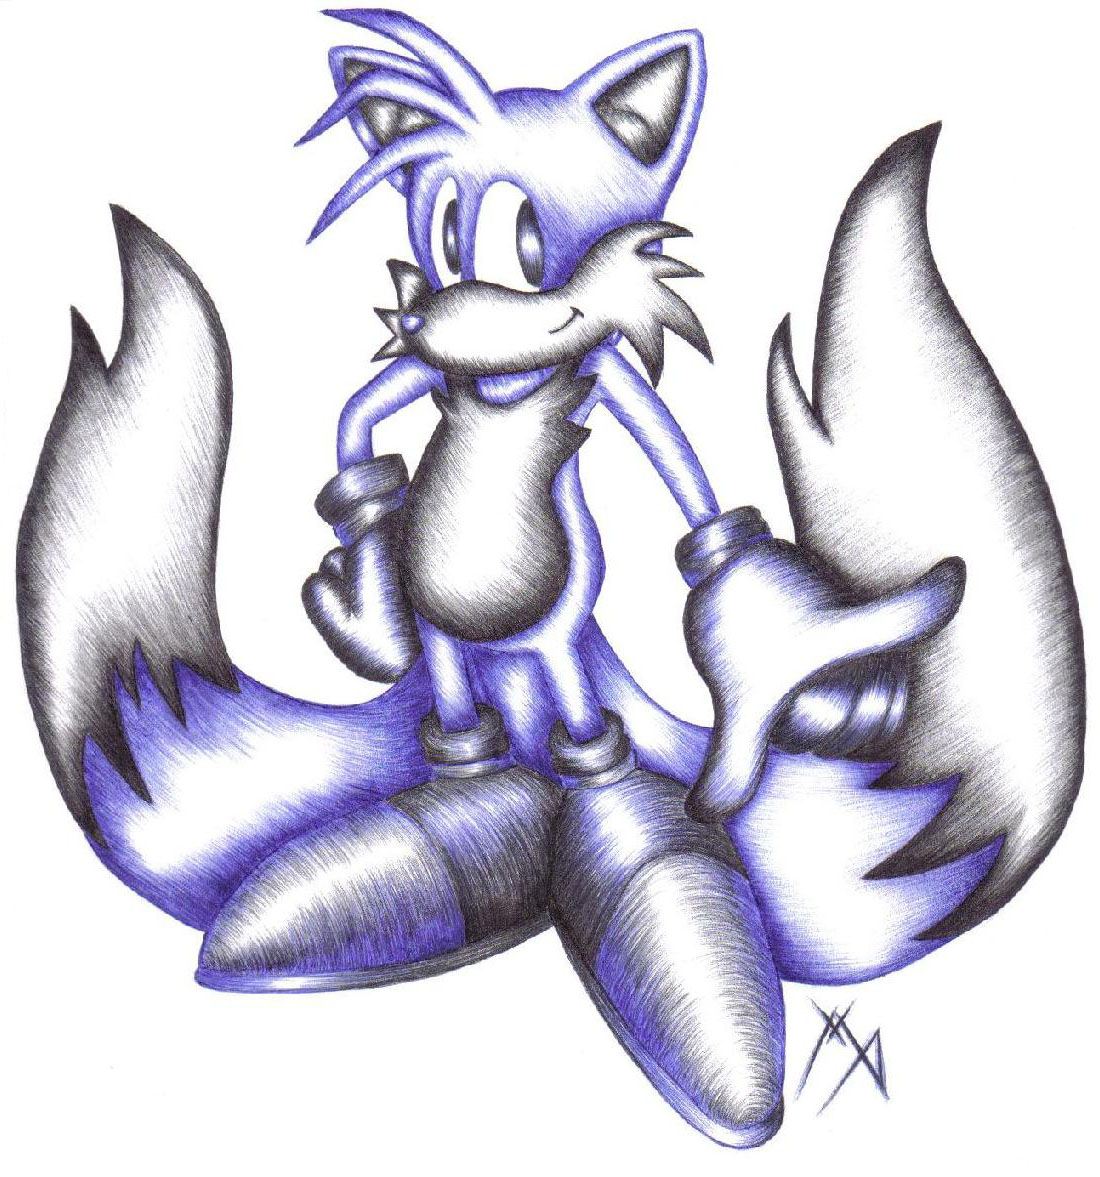 Tails Prower by MitchellP